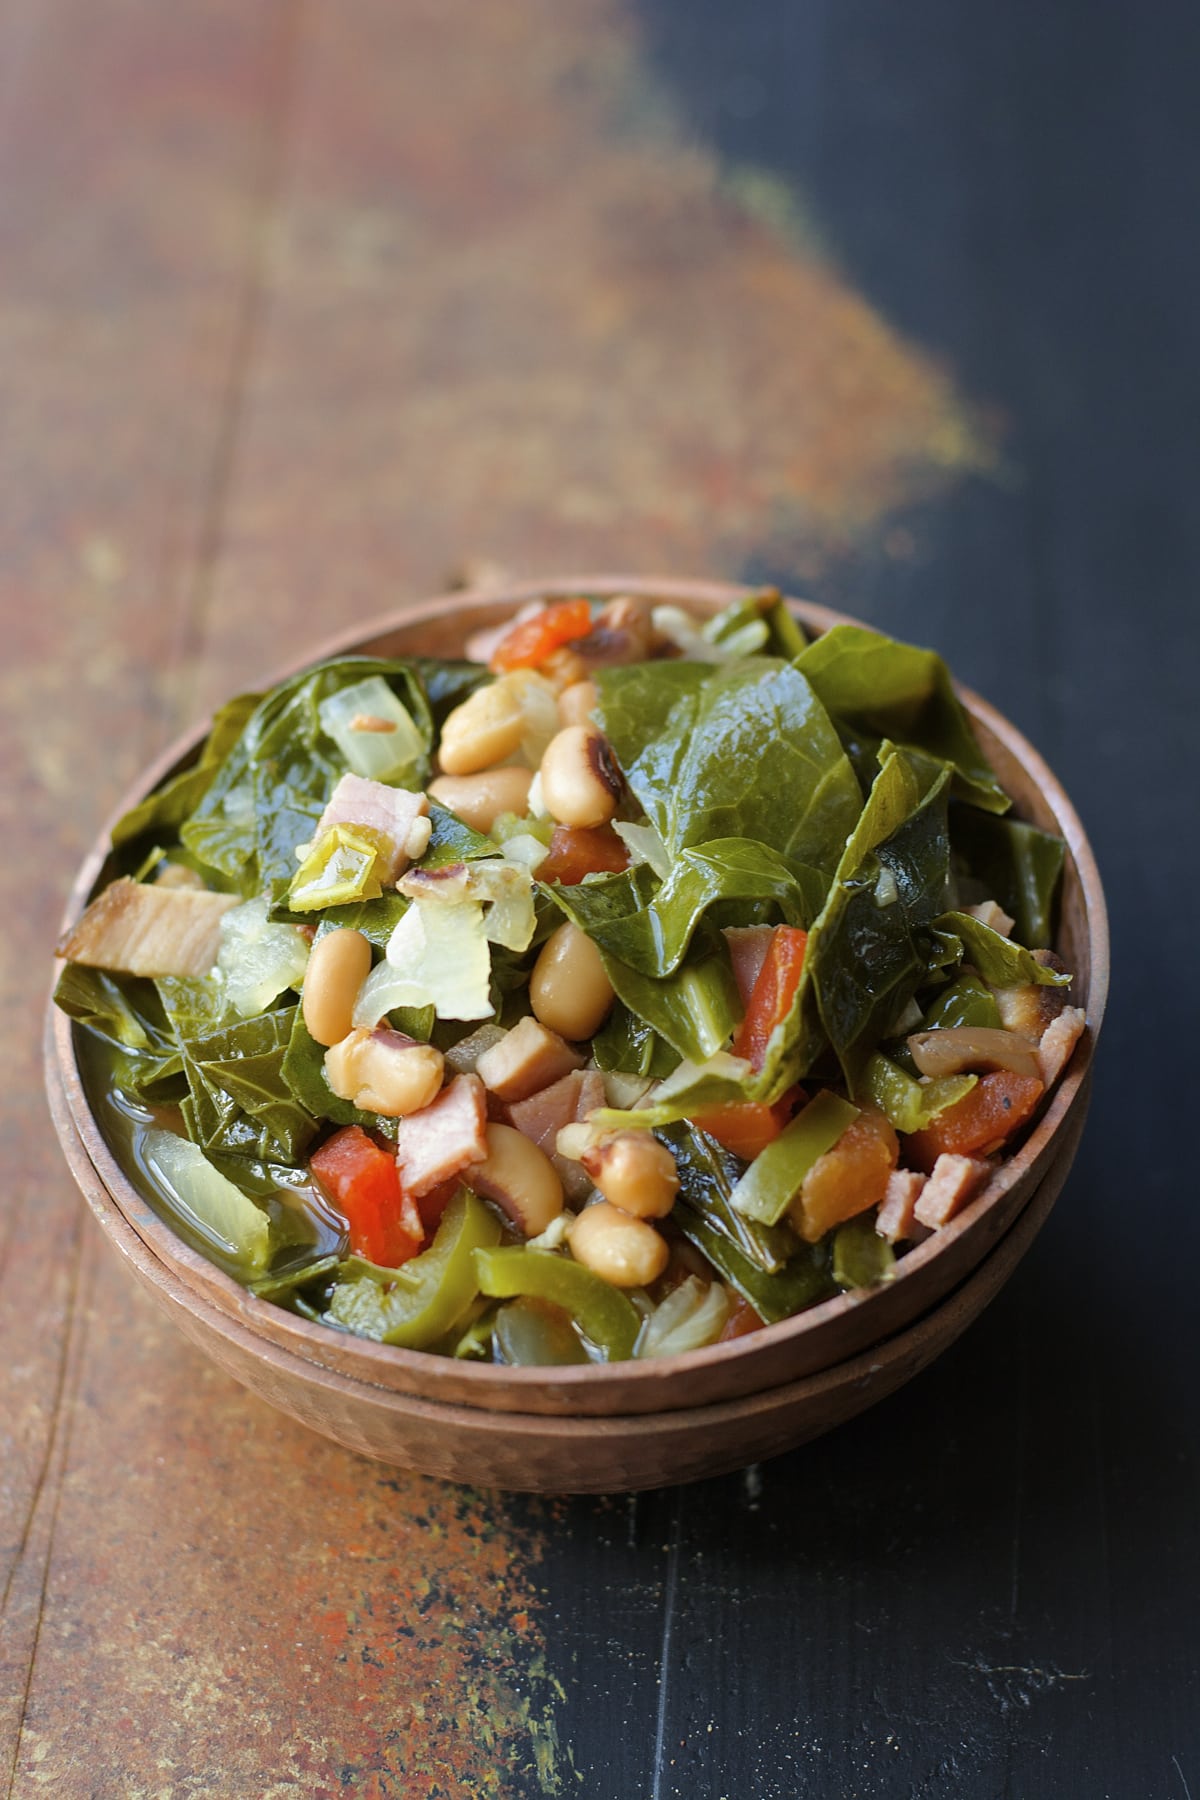 Crock Pot Black Eyed Peas and Collard Greens are the ultimate Southern comfort food! Tender greens, salty ham, and spicy jalapenos make the absolute best slow cooker meal.